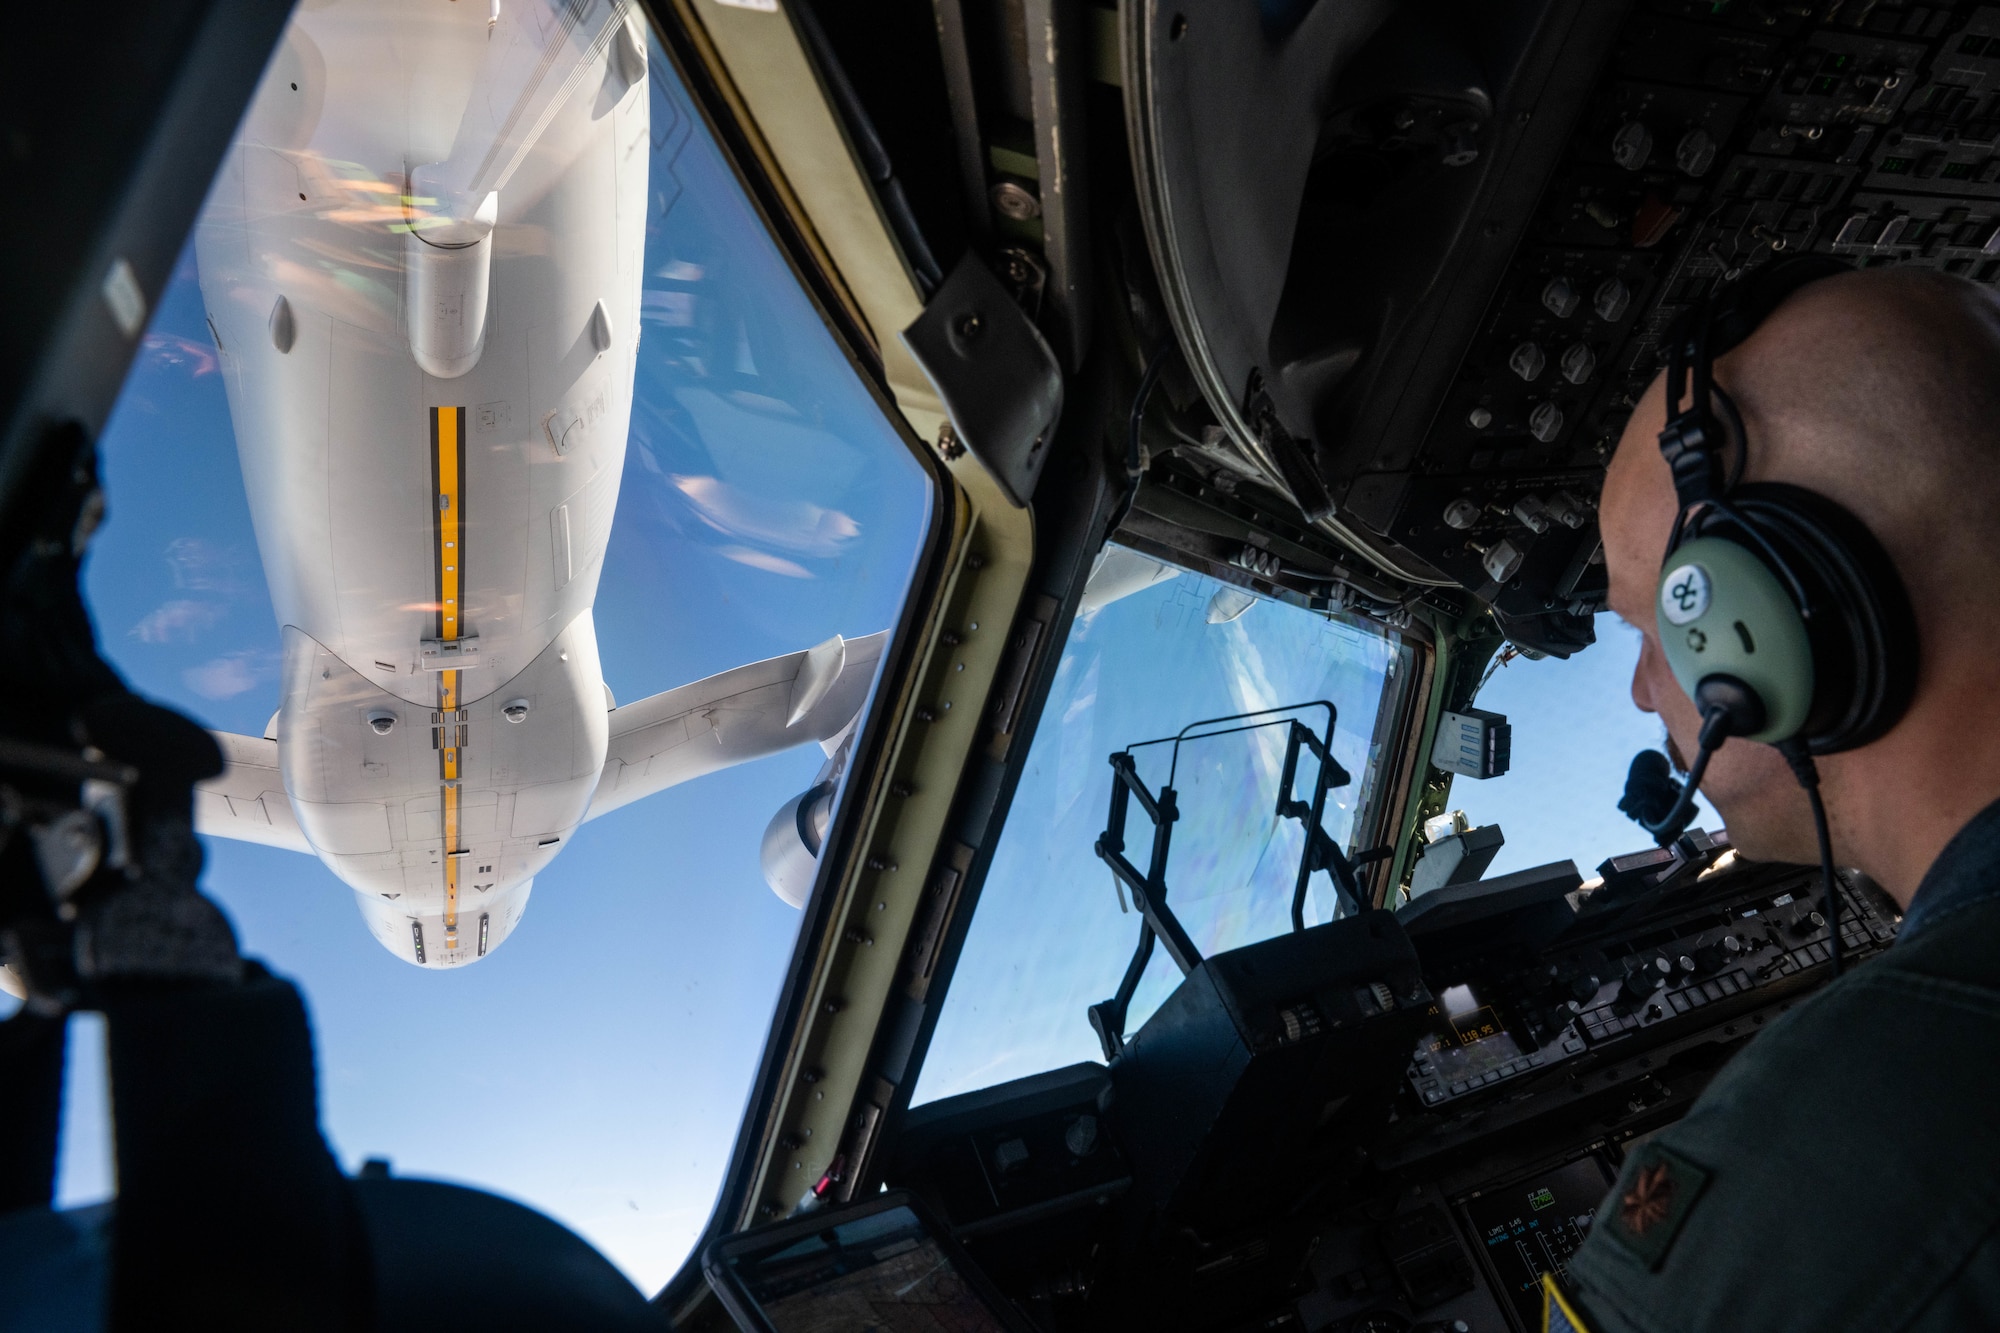 U.S. Air Force Maj. Dane Wold, No. 36 Squadron pilot, prepares to receive fuel from a Royal Australian Air Force KC-30A Multi-Role Tanker Transport (MRTT) in the skies over Australia during a training flight for Global Dexterity 23-1, April 25, 2023. This is the sixth iteration of Exercise Global Dexterity between the U.S. Air Force and our Indo-Pacific partners, the Royal Australian Air Force, and focuses on strengthening our military partnership in the region. (U.S. Air Force photo by Senior Airman Makensie Cooper)